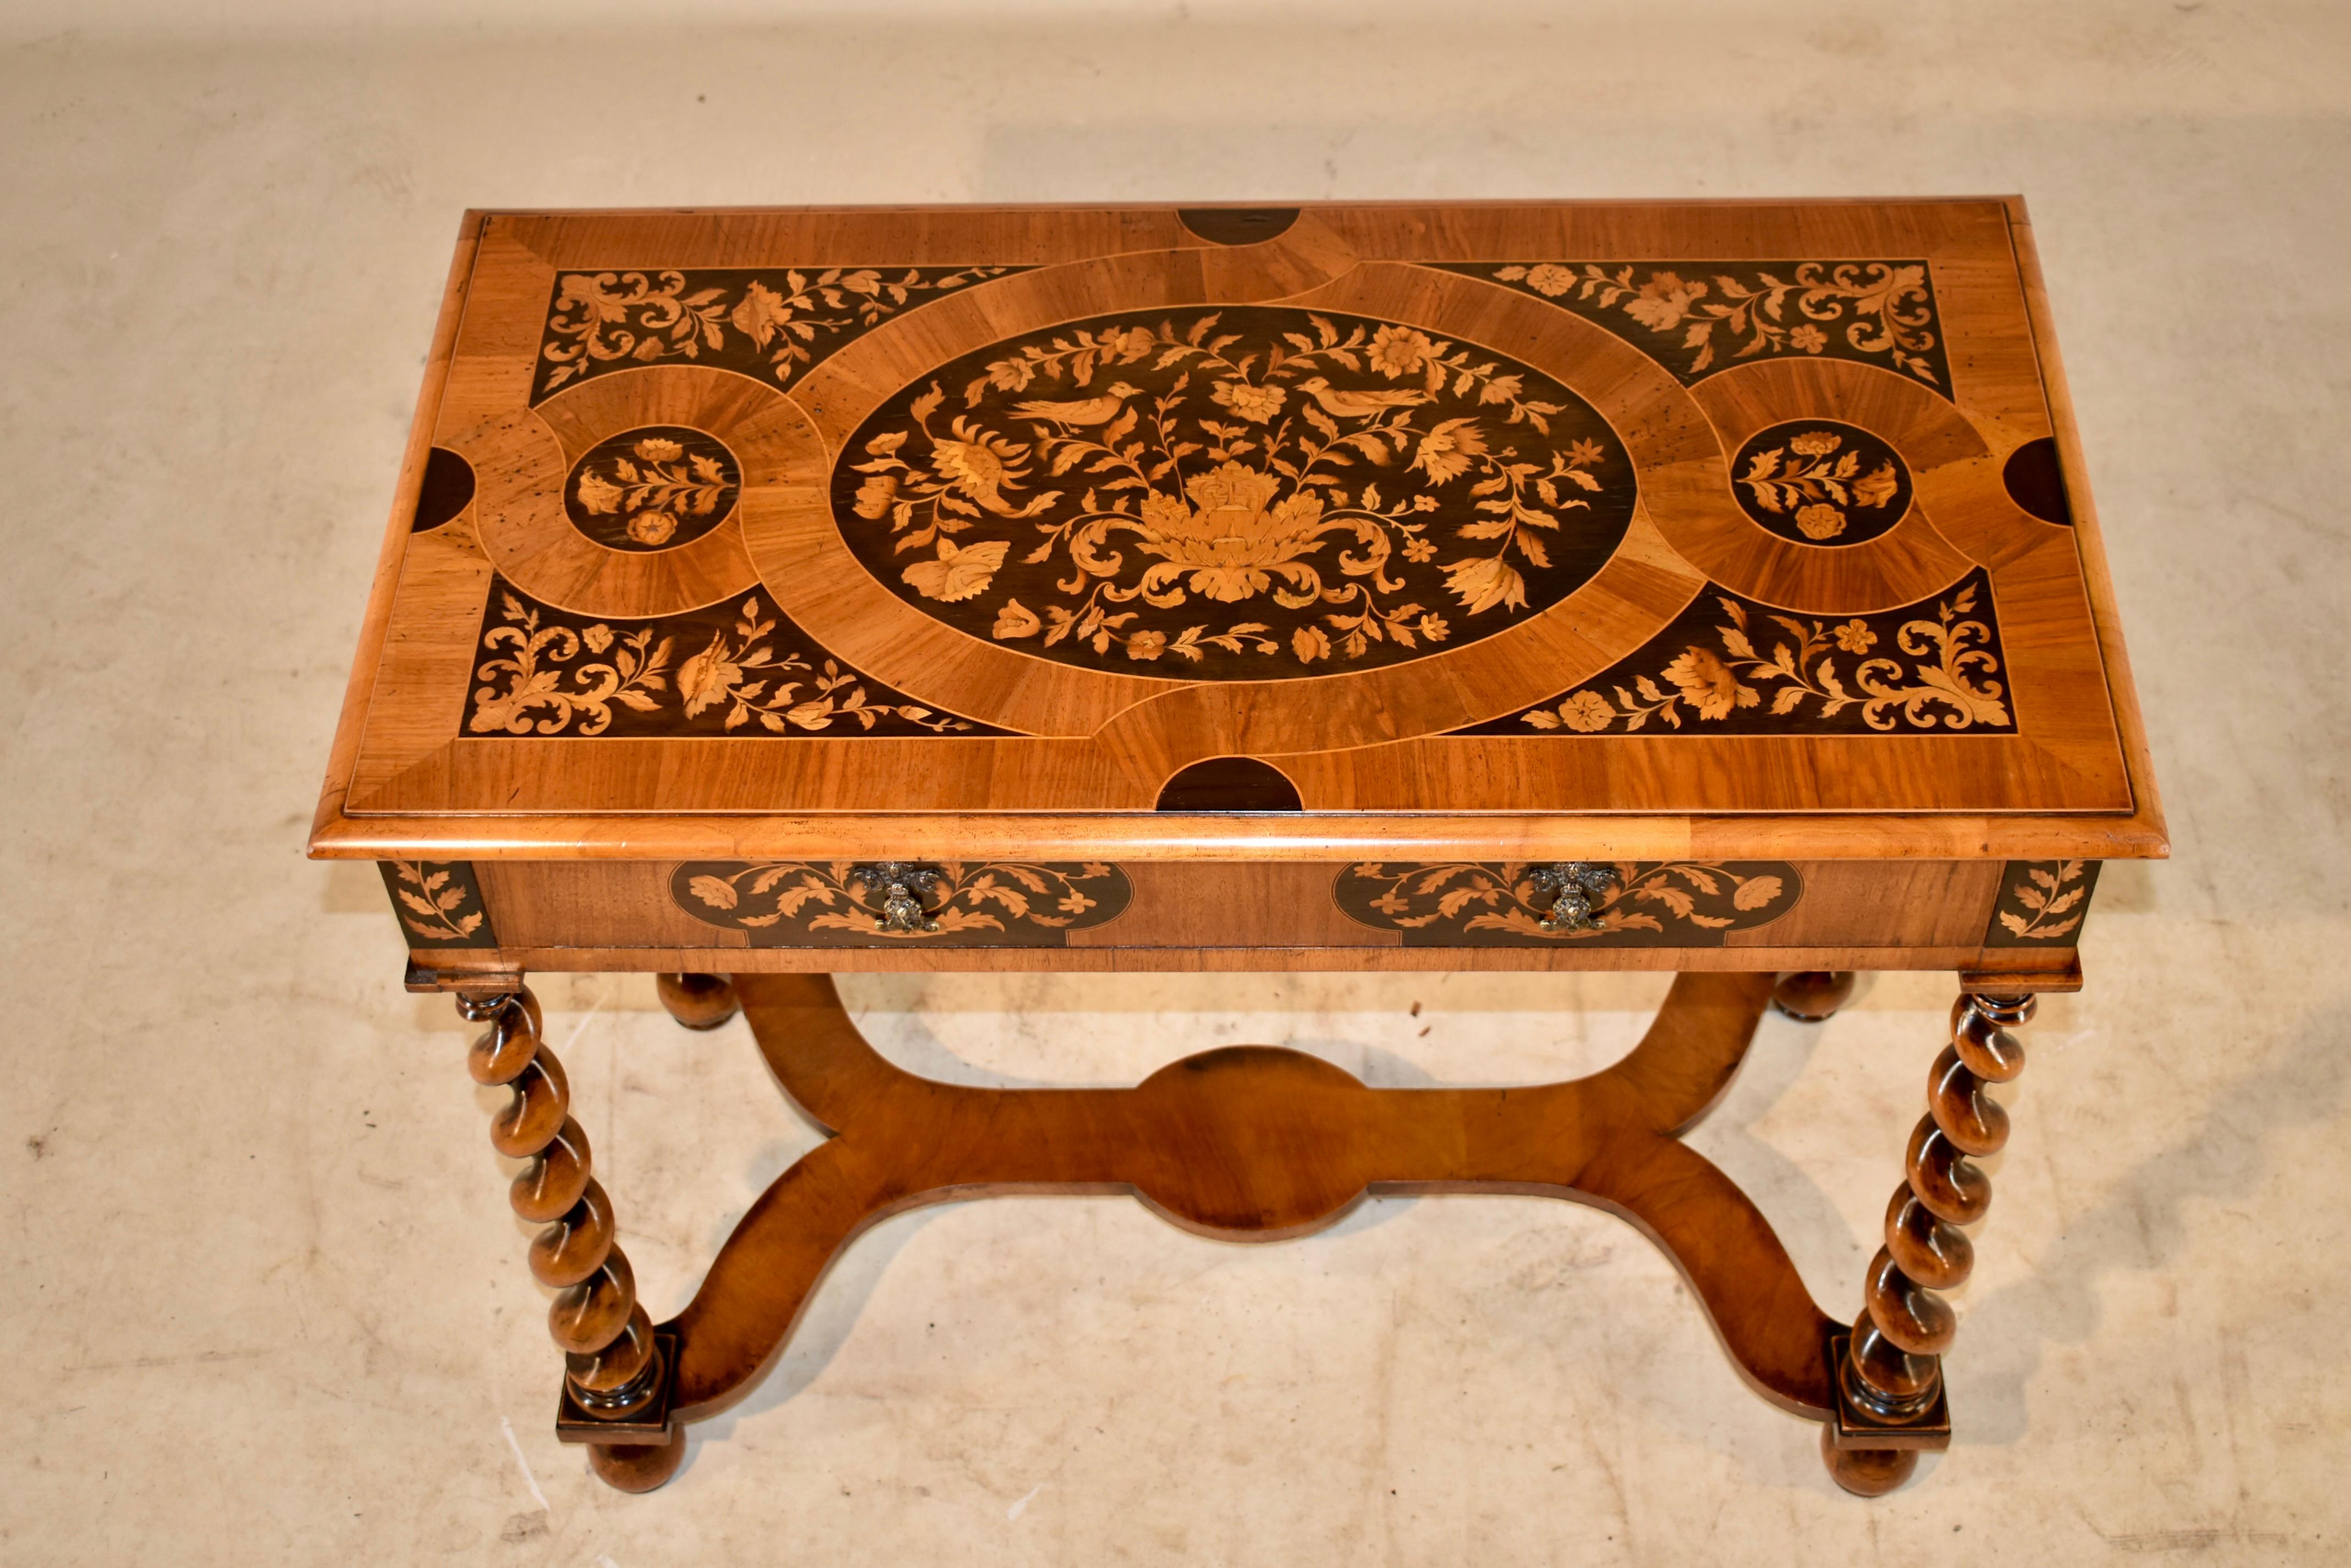 Edwardian English Marquetry Side Table, c. 1900 For Sale 1